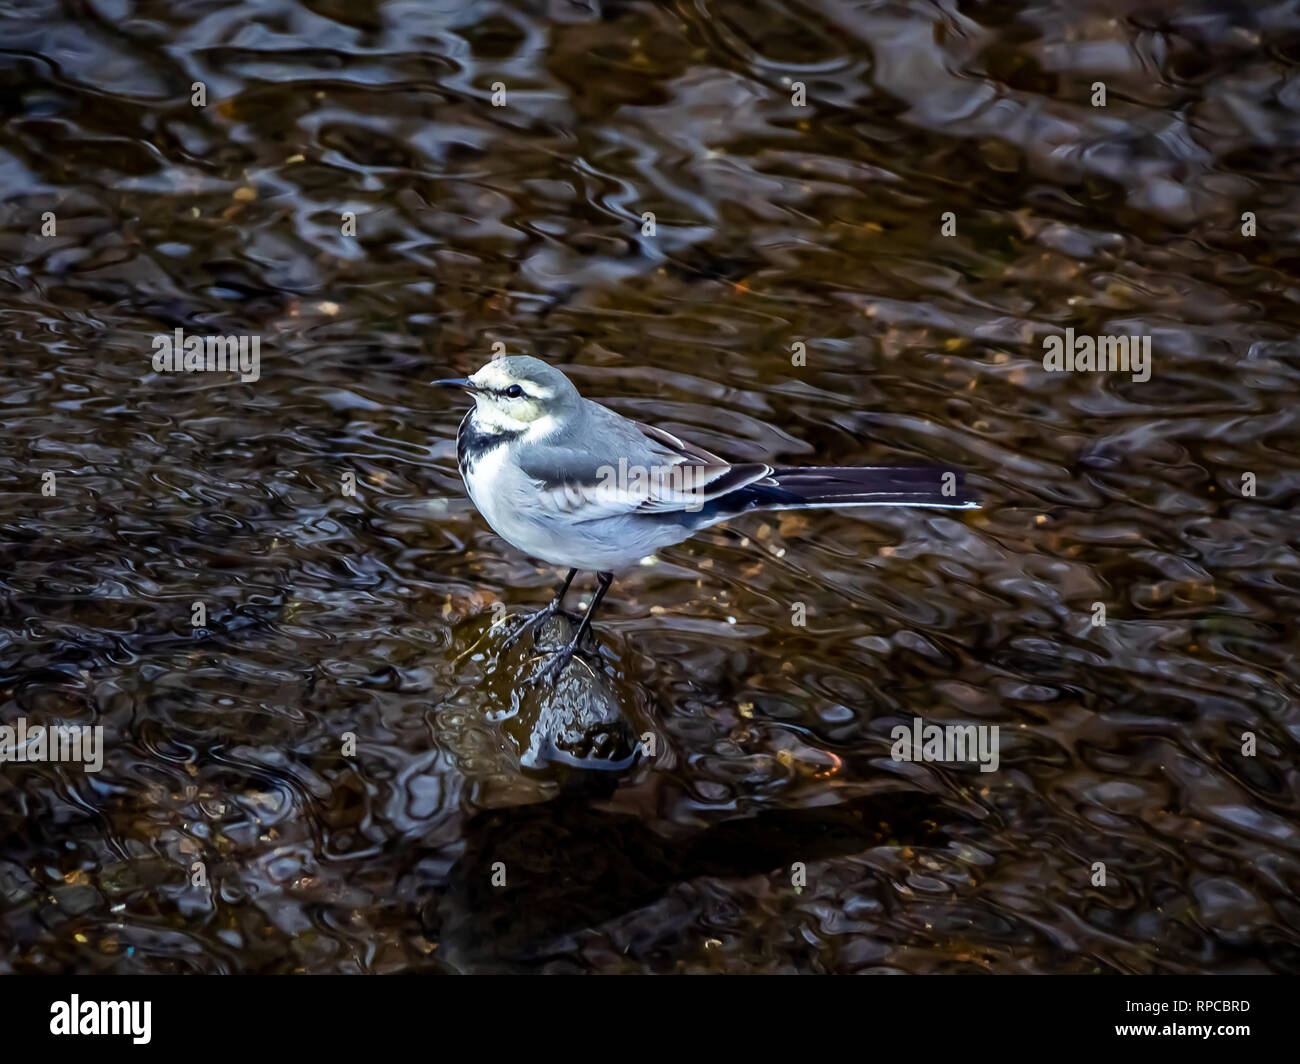 A white wagtail hops across the rocks in a shallow Japanese river in central Kanagawa Prefecture, Japan Stock Photo